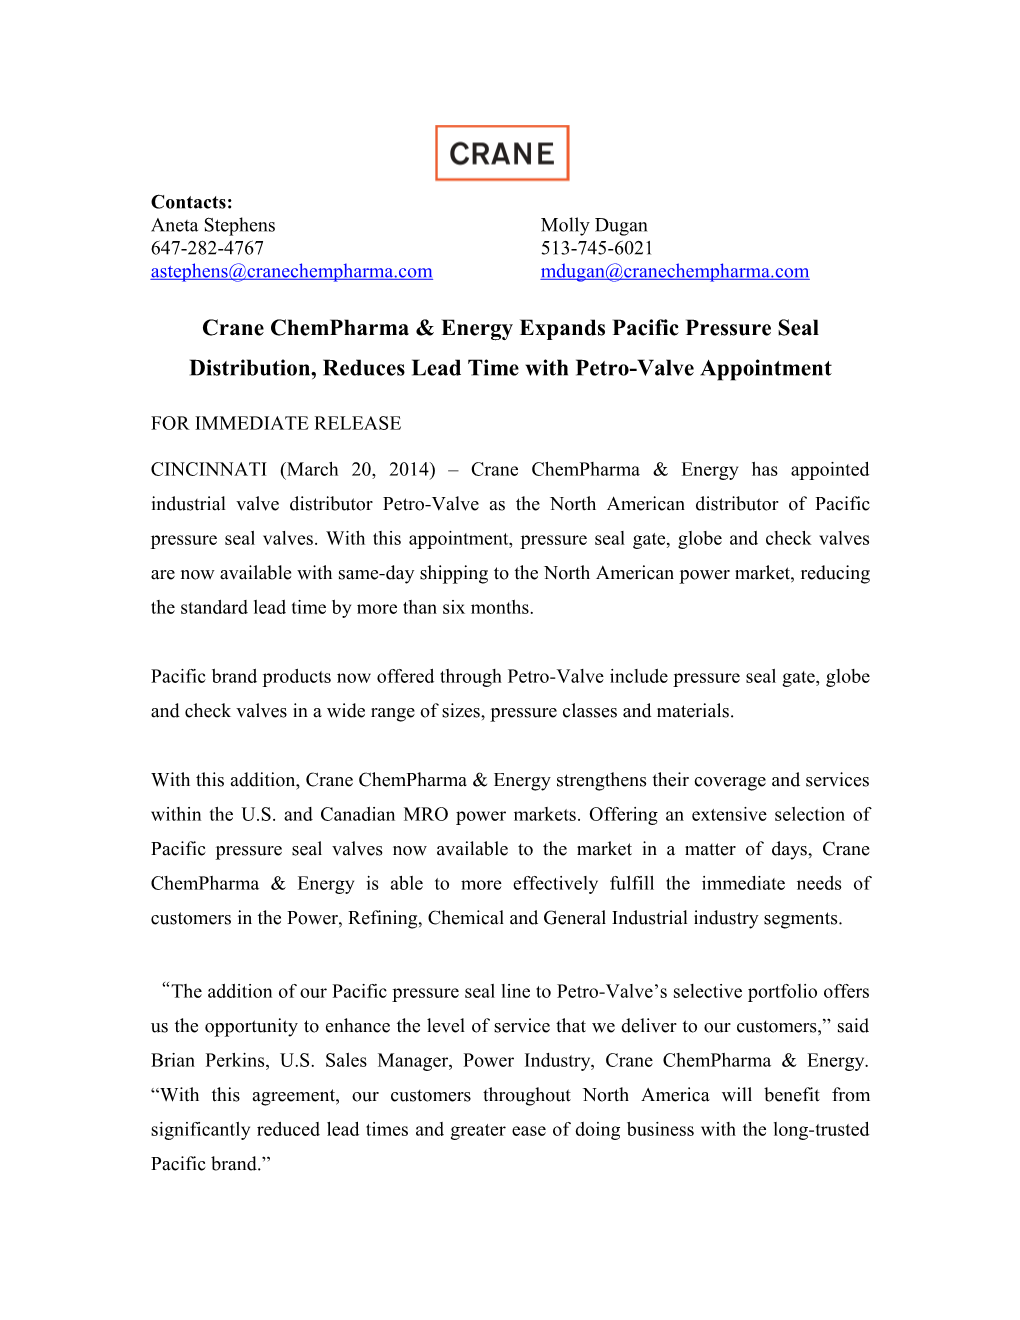 Crane Chempharma & Energy Expands Pacific Pressure Seal Distribution, Reduces Lead Time